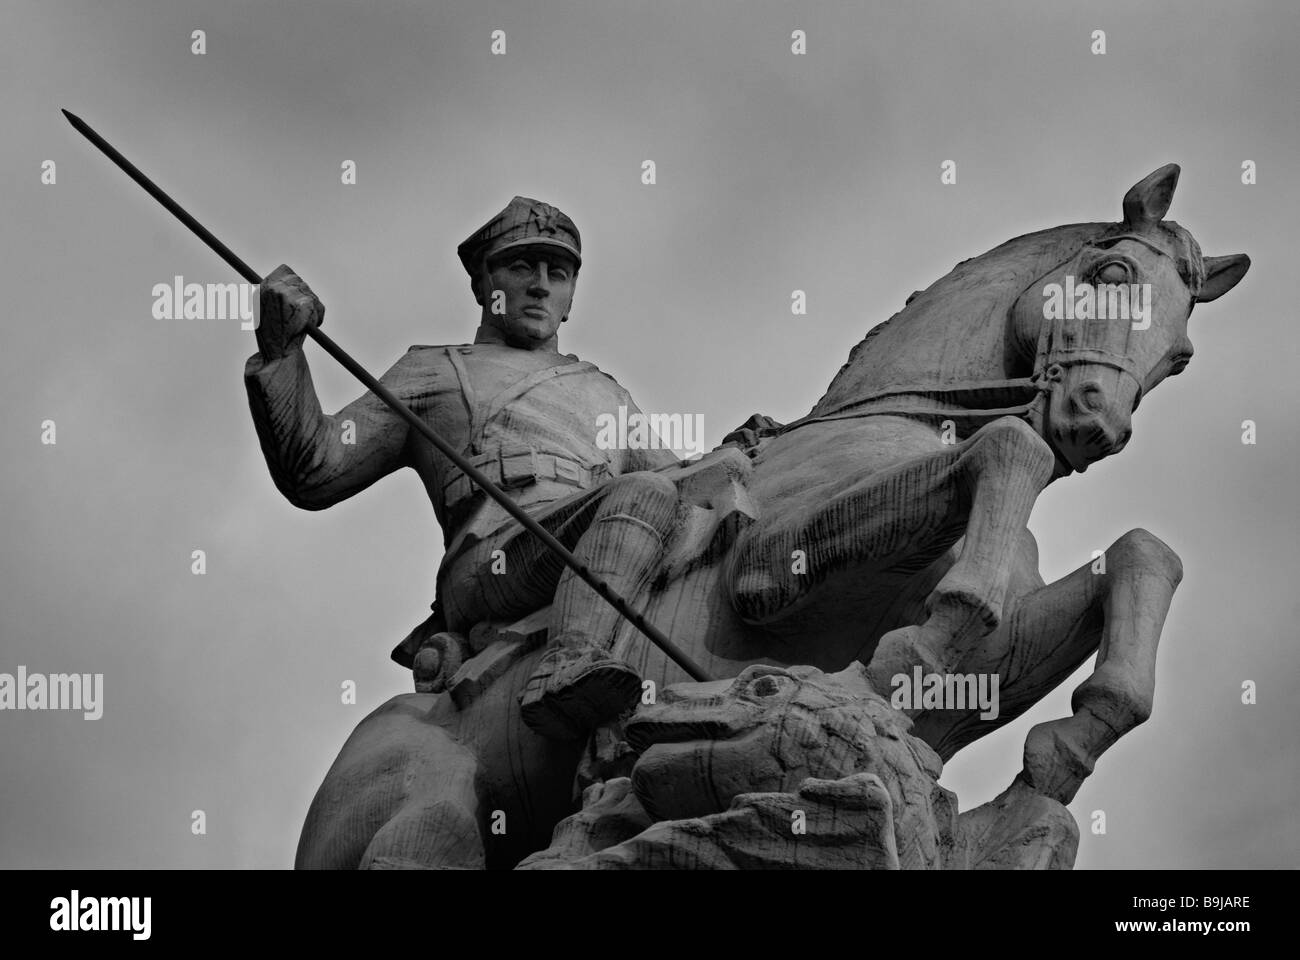 A memorial statue to Poznan's Cavalry (Uhlans) shows a soldier on horseback armed with a spear, Poznan, Poland Stock Photo